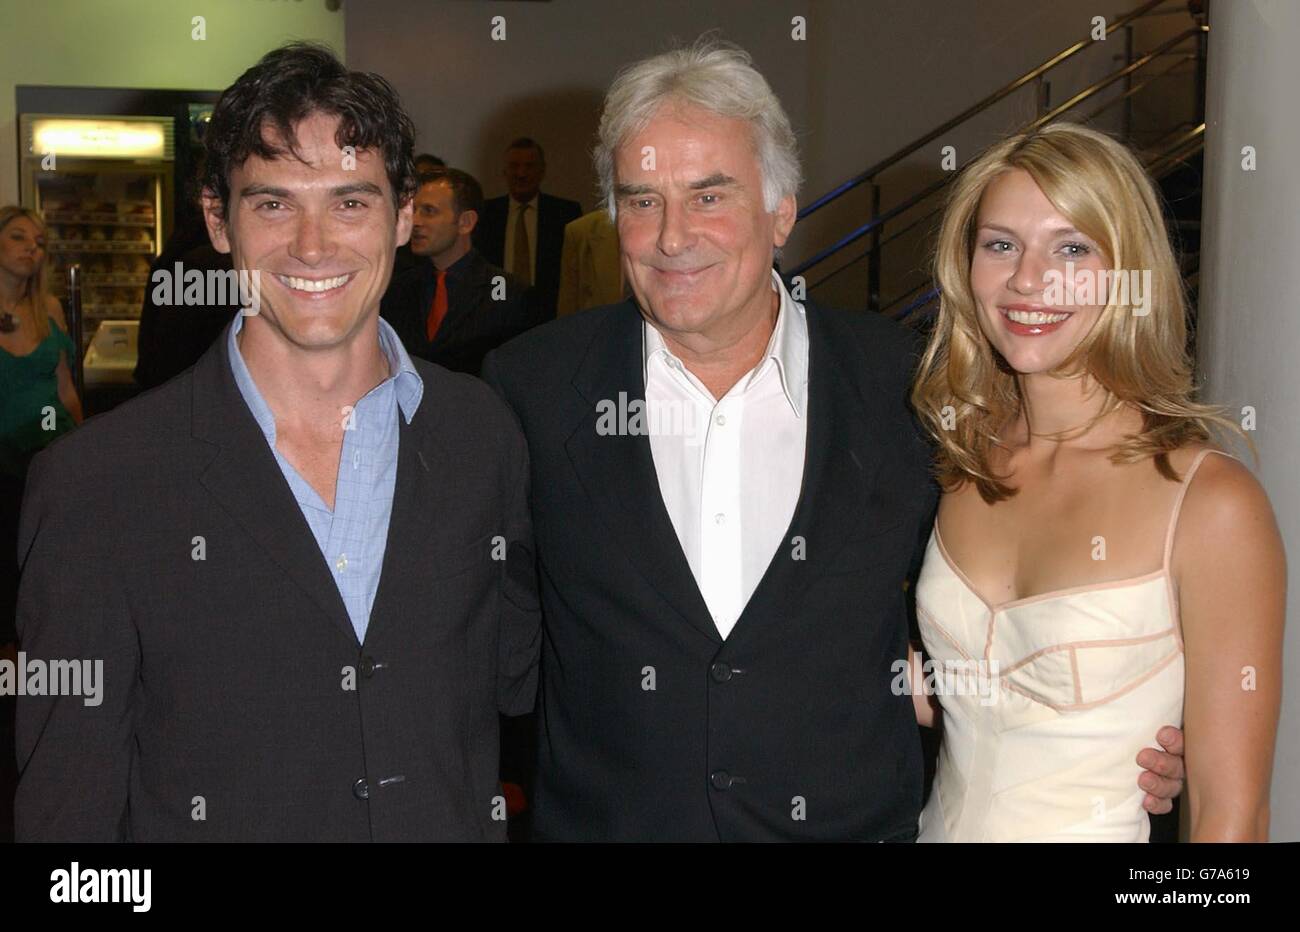 Director Richard Eyre (centre) with stars of the film Billy Crudup and Claire Danes as they arrive for the London Charity premiere of Stage Beauty at the Odeon West End in central London in aid of The National Film and Television School. Stock Photo